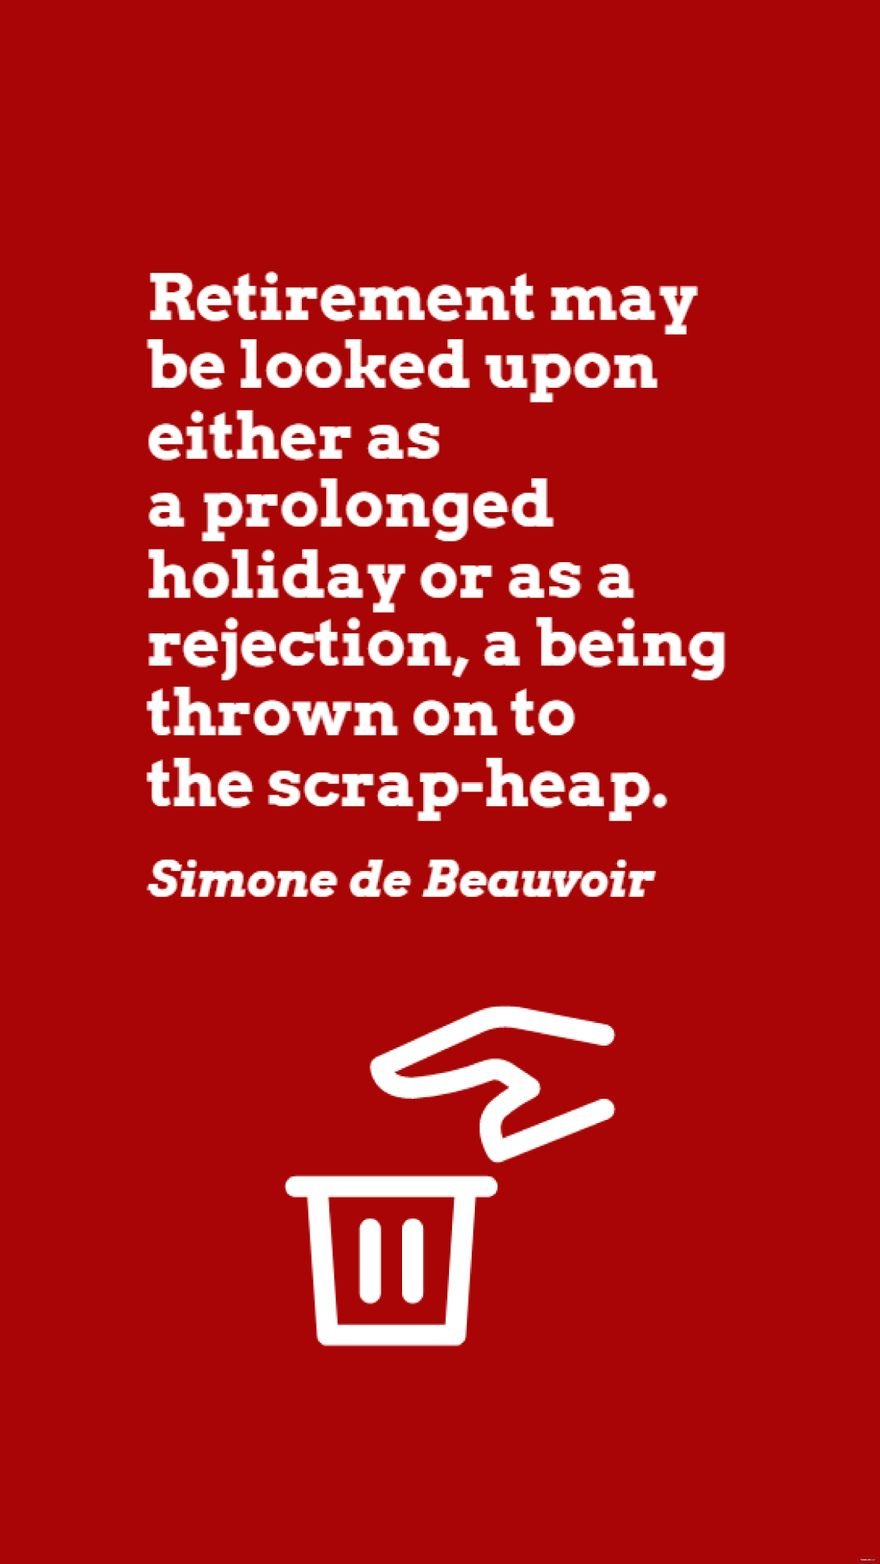 Simone de Beauvoir - Retirement may be looked upon either as a prolonged holiday or as a rejection, a being thrown on to the scrap-heap.